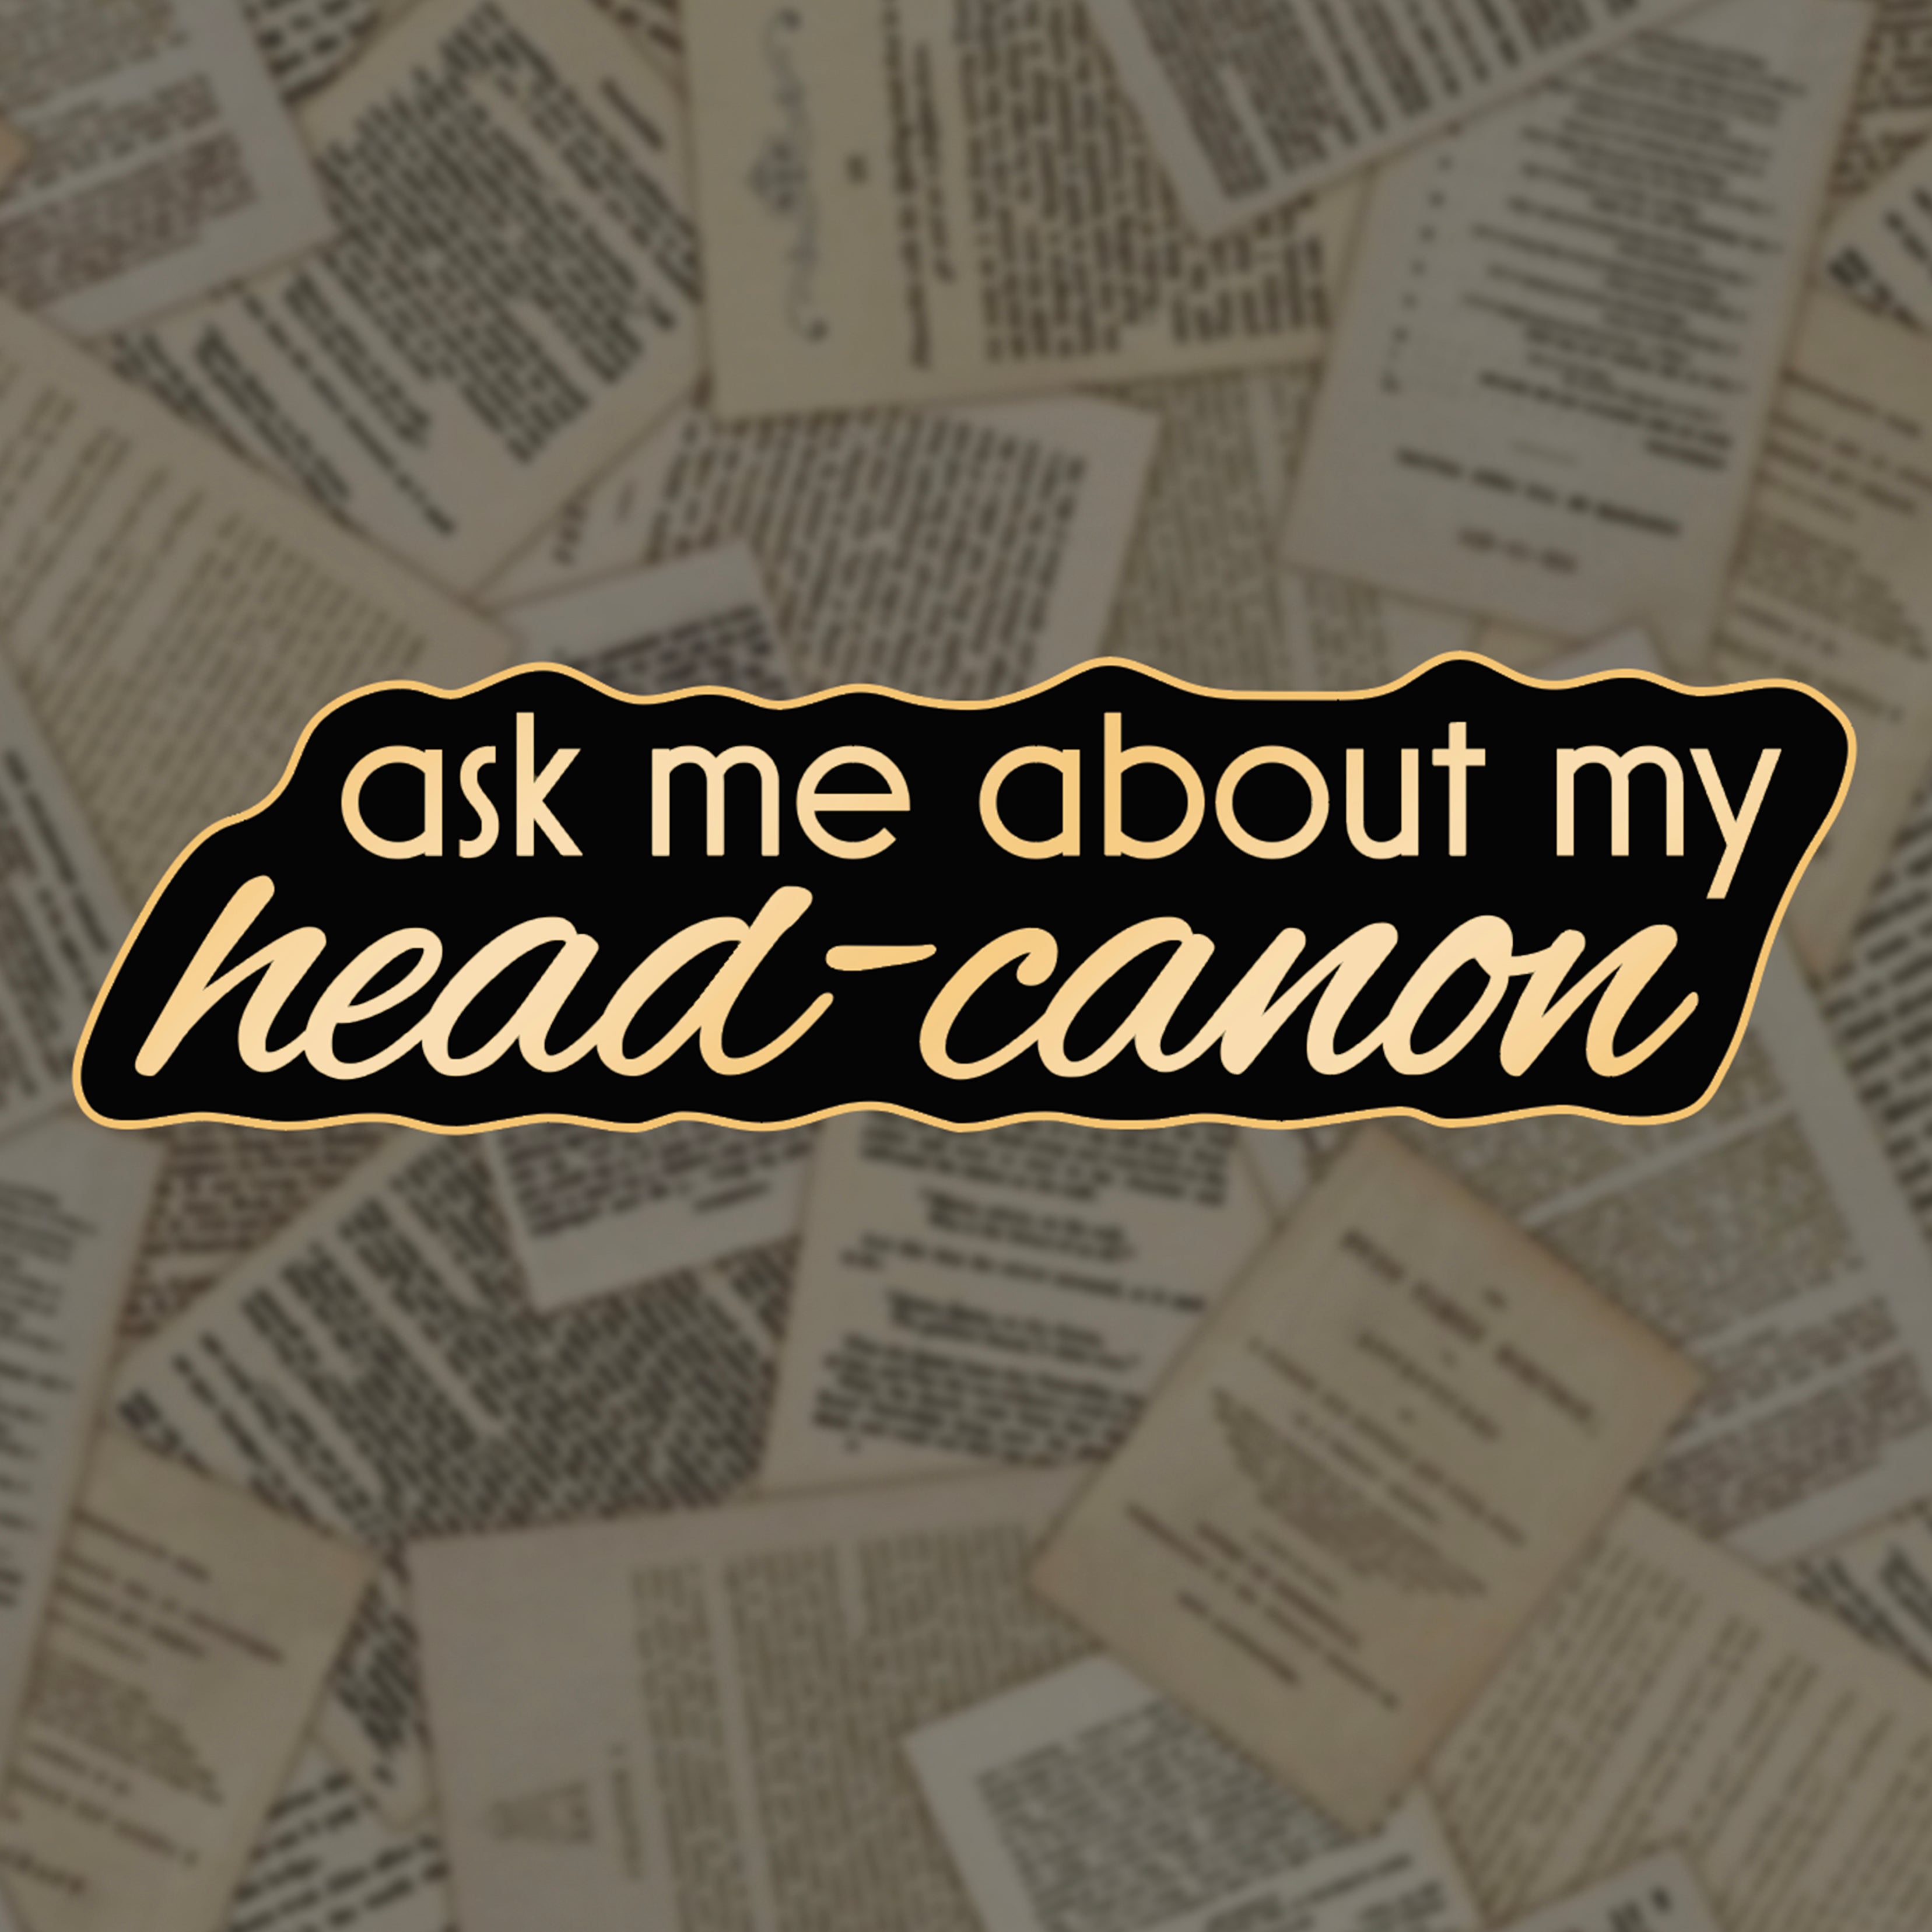 Canons in the Head